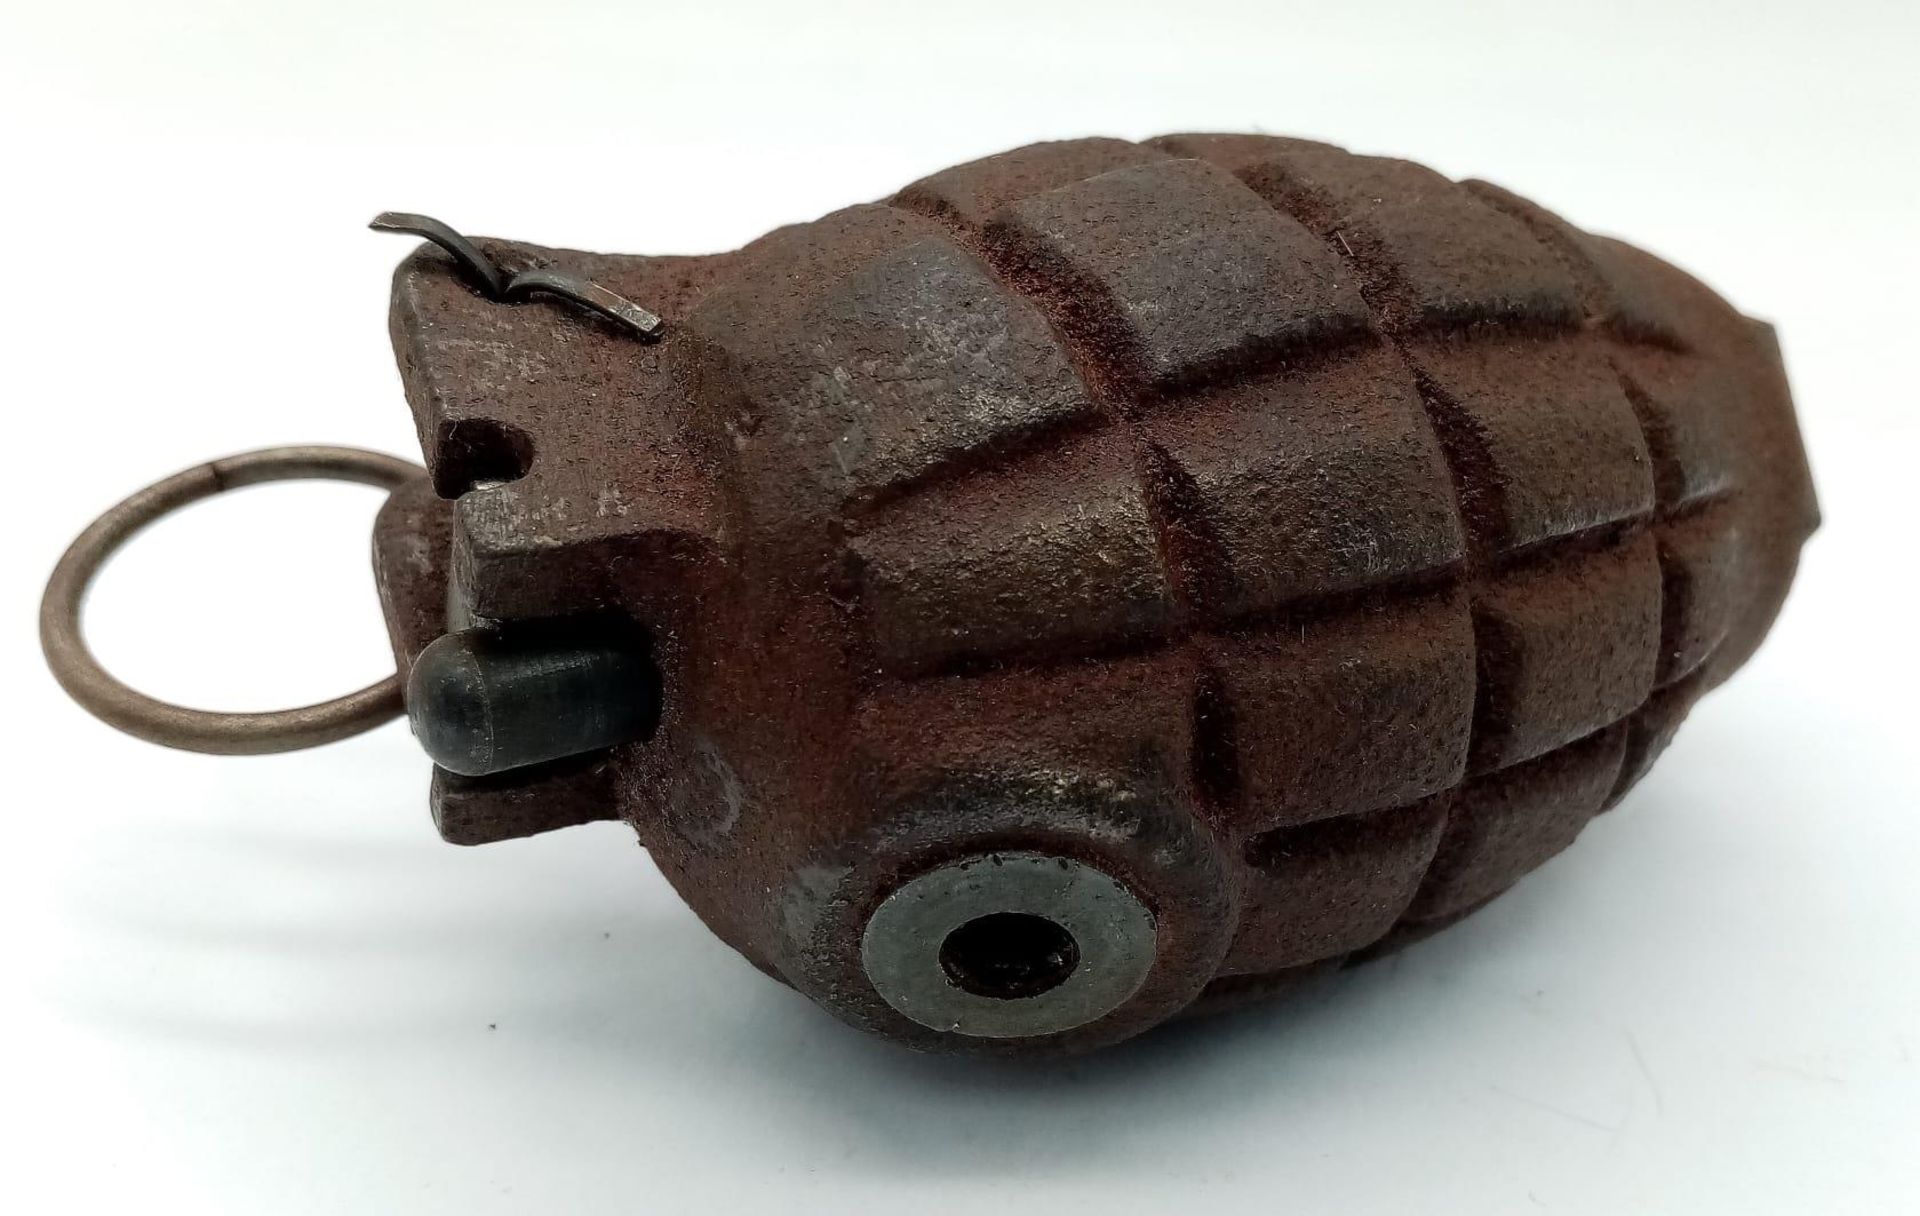 INERT Israeli No 36 Hand Grenade circa late 1940’a-erly 1950’s. UK Mainland Sales Only. - Image 4 of 7